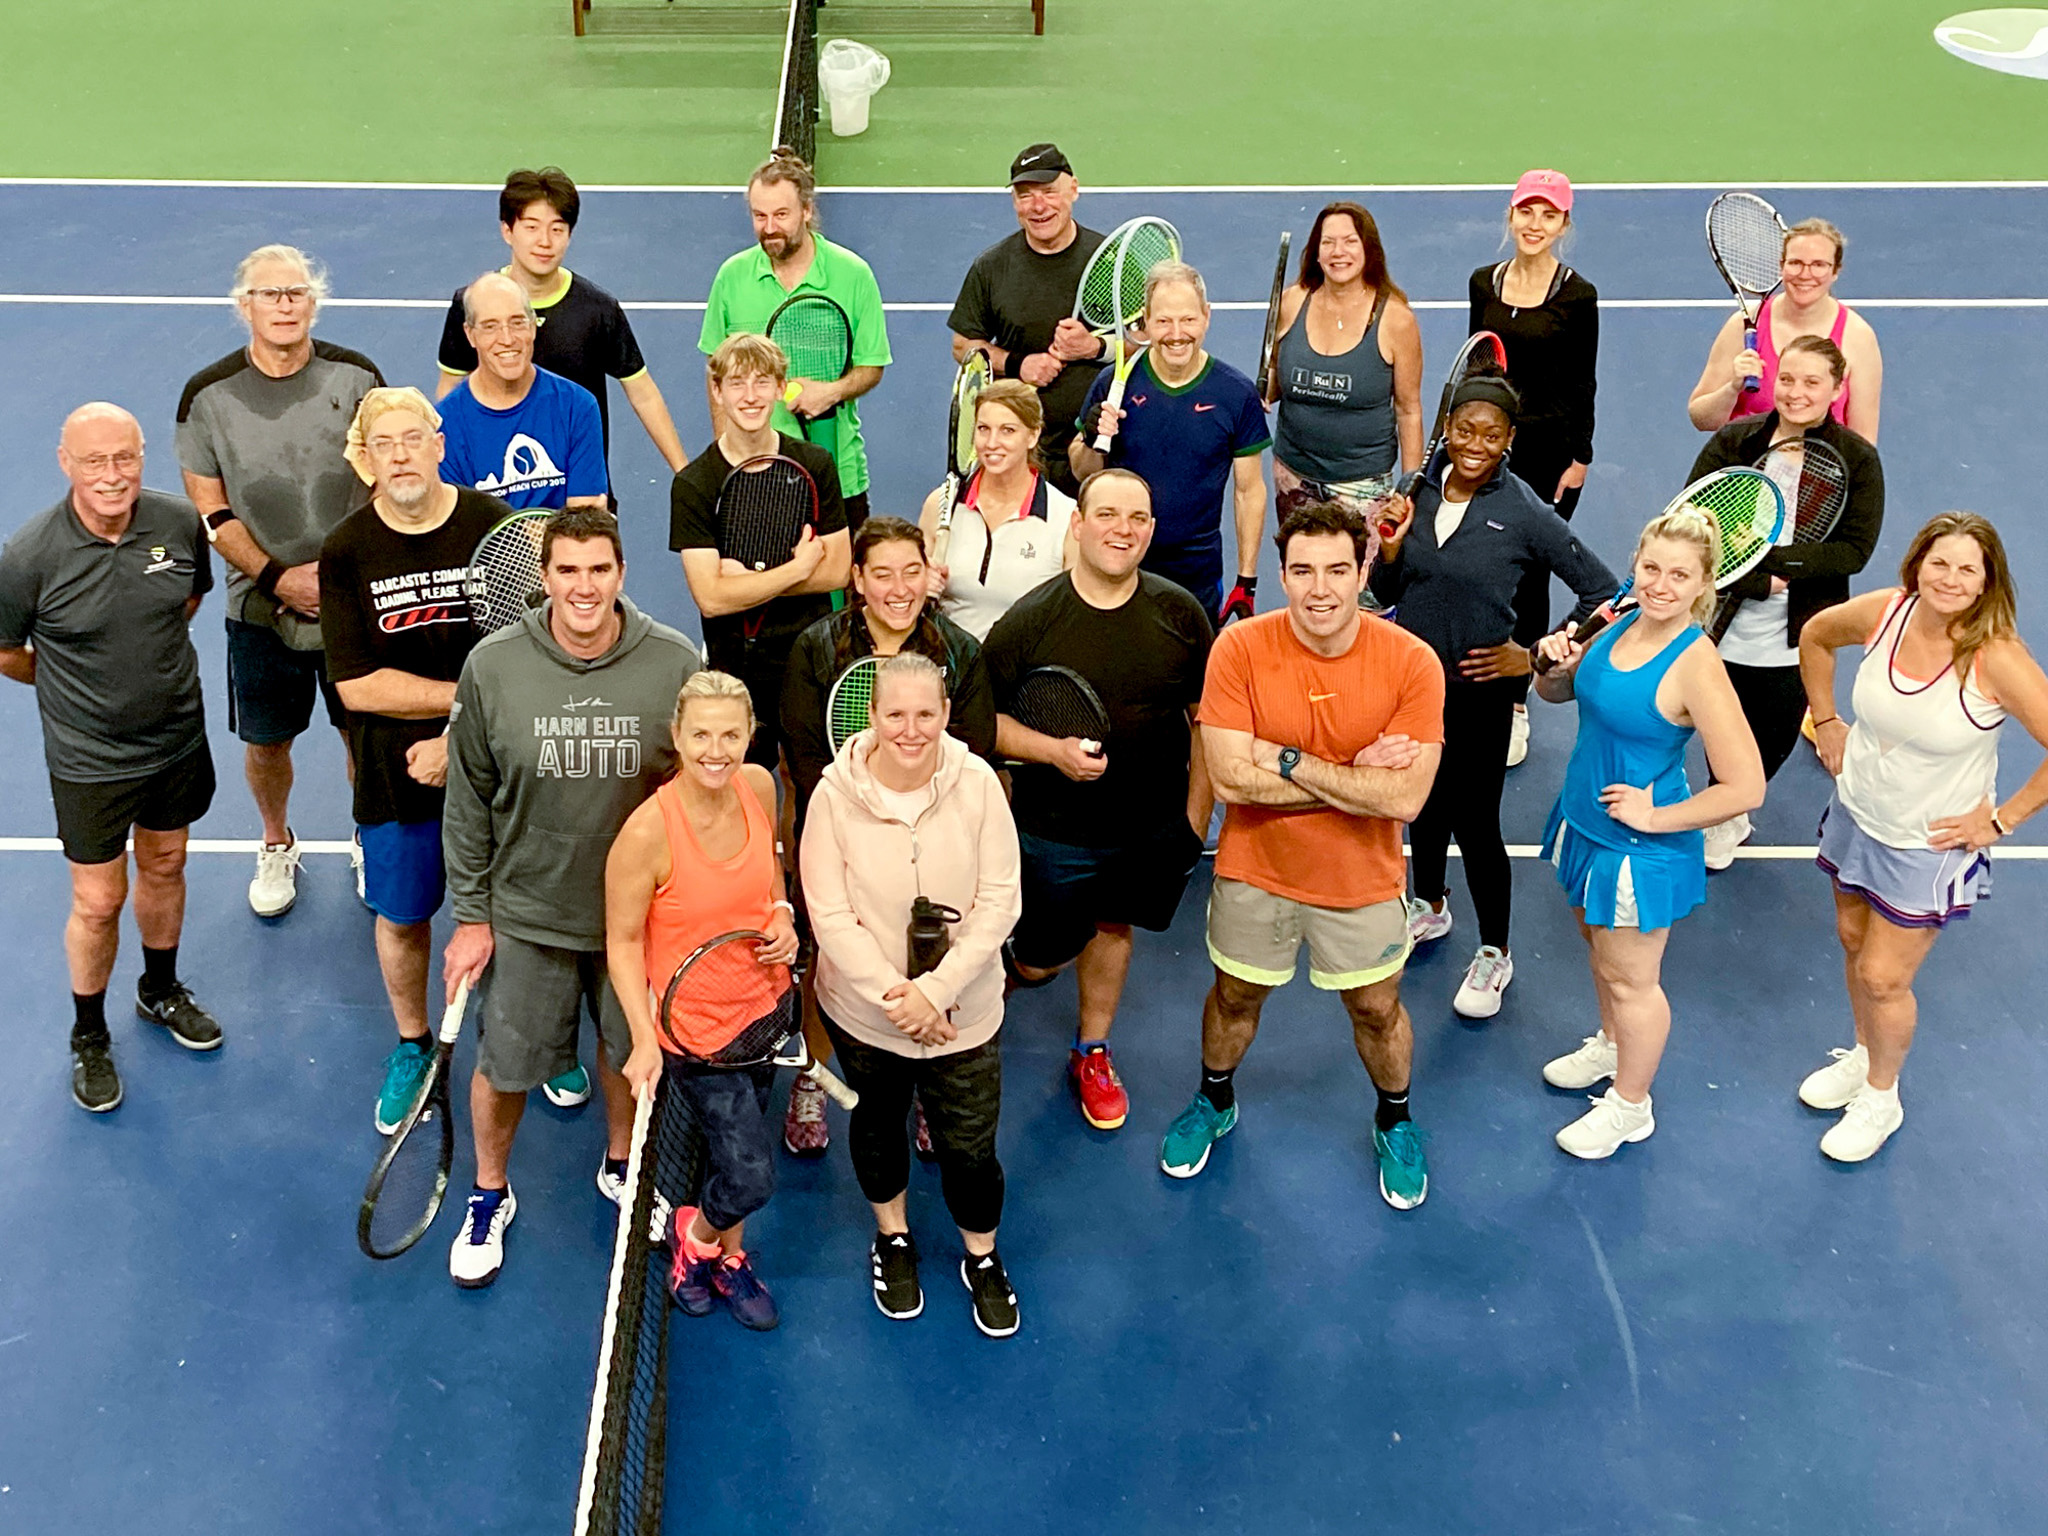 Find Health, Connection, and Community at Steamboat Tennis & Athletic Club in Olympia